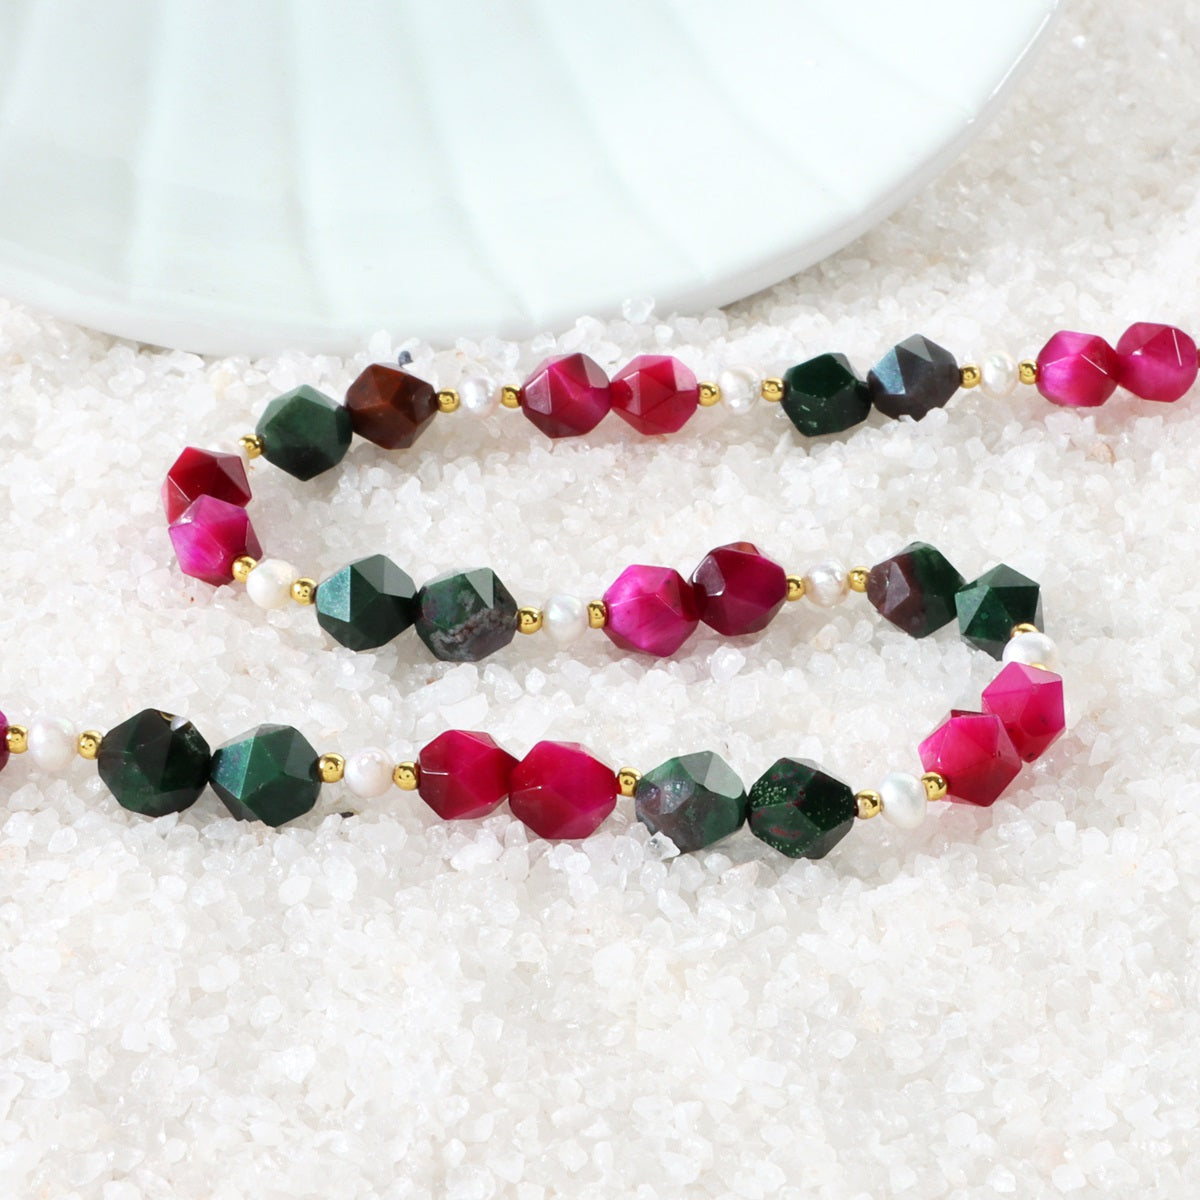 Faceted Star Cut Bloodstone and Pink Tiger's Eye Beads in Silver Necklace